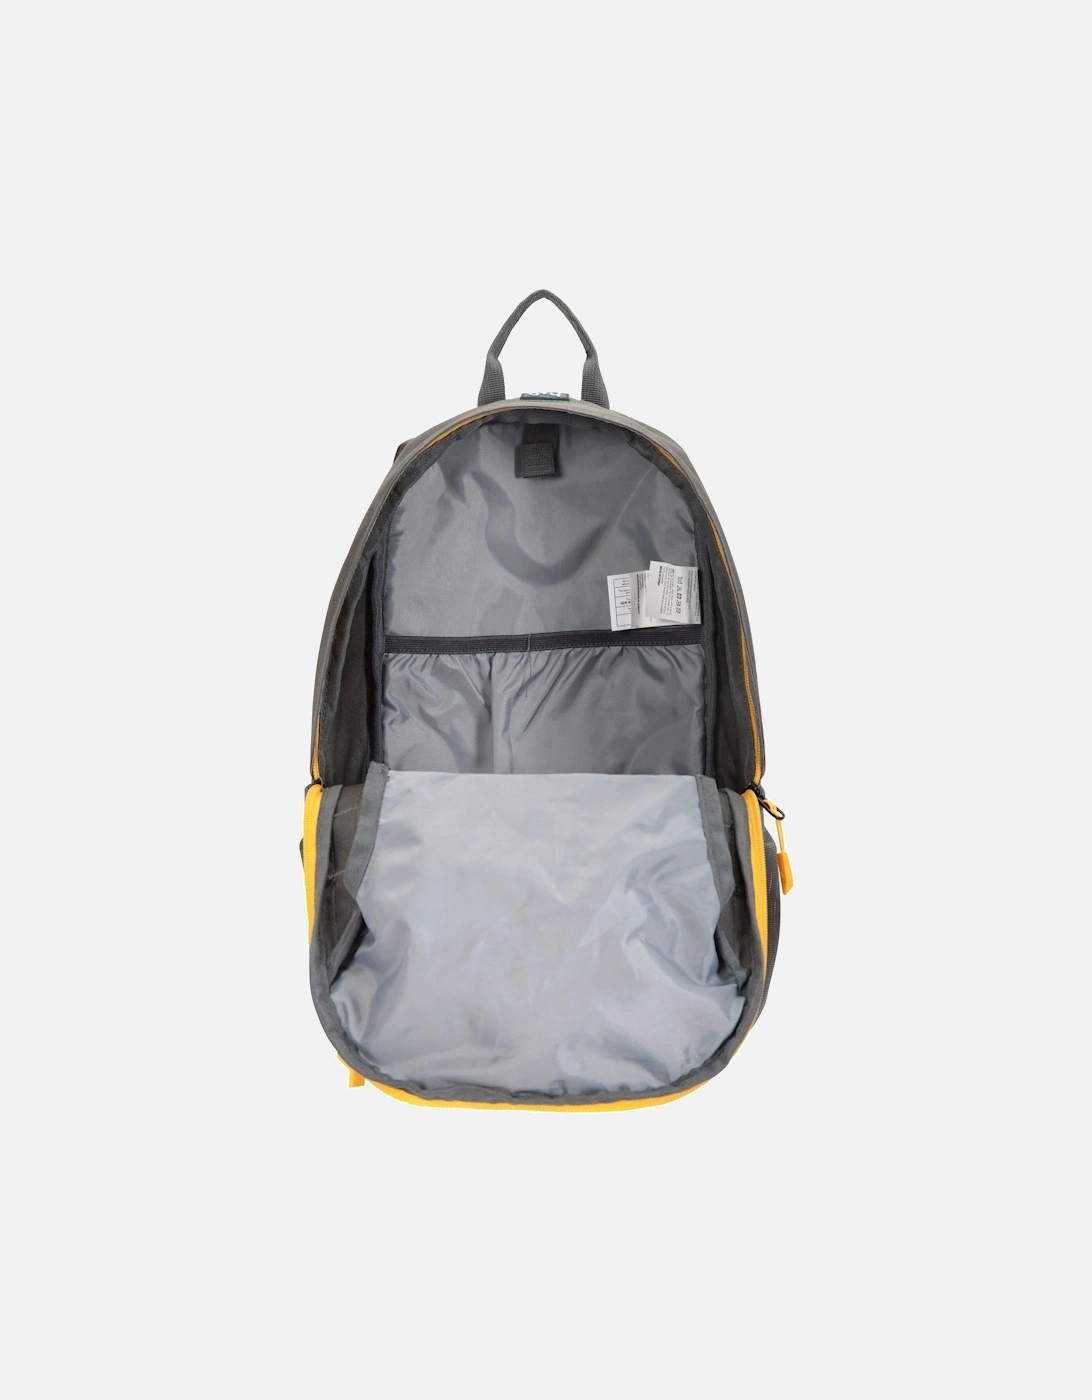 Pace 12L Backpack